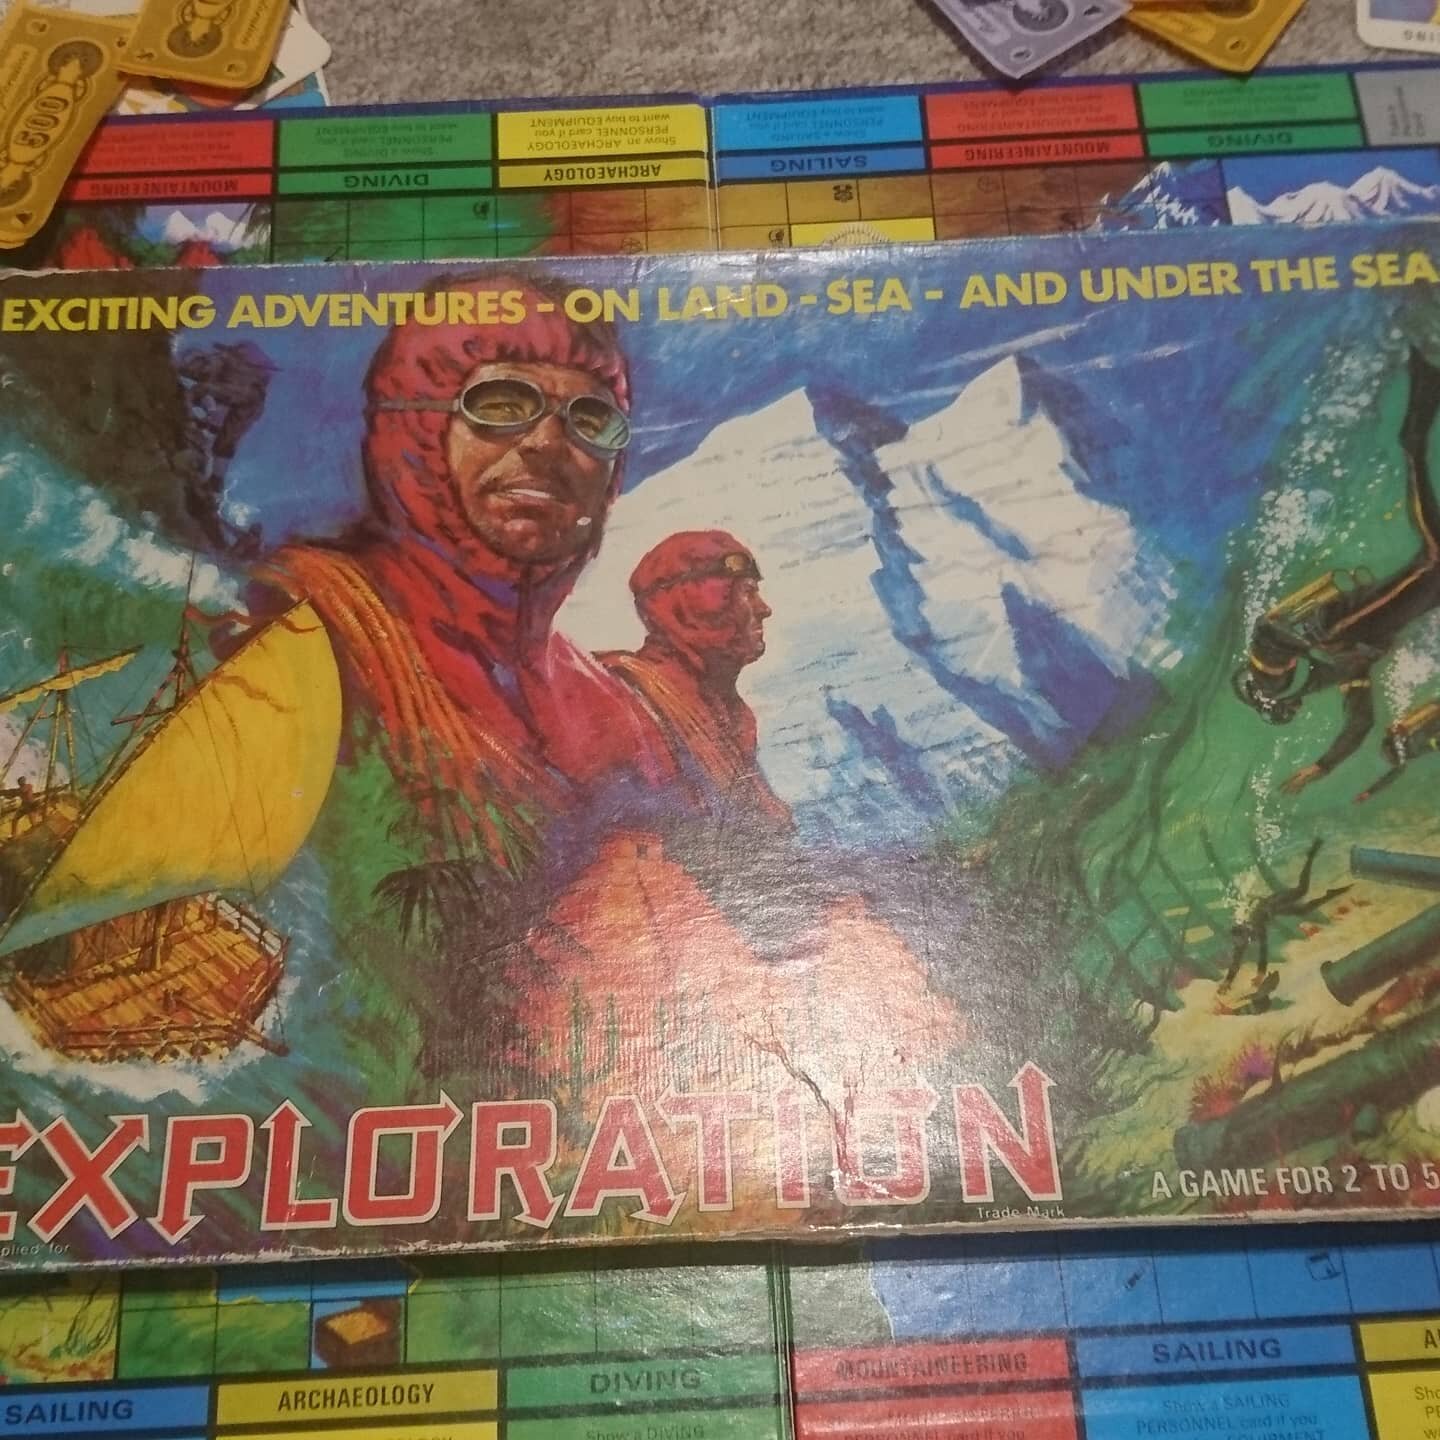 One of my childhood influences and inspiration for adventure with a purpose, was the board game Exploration.